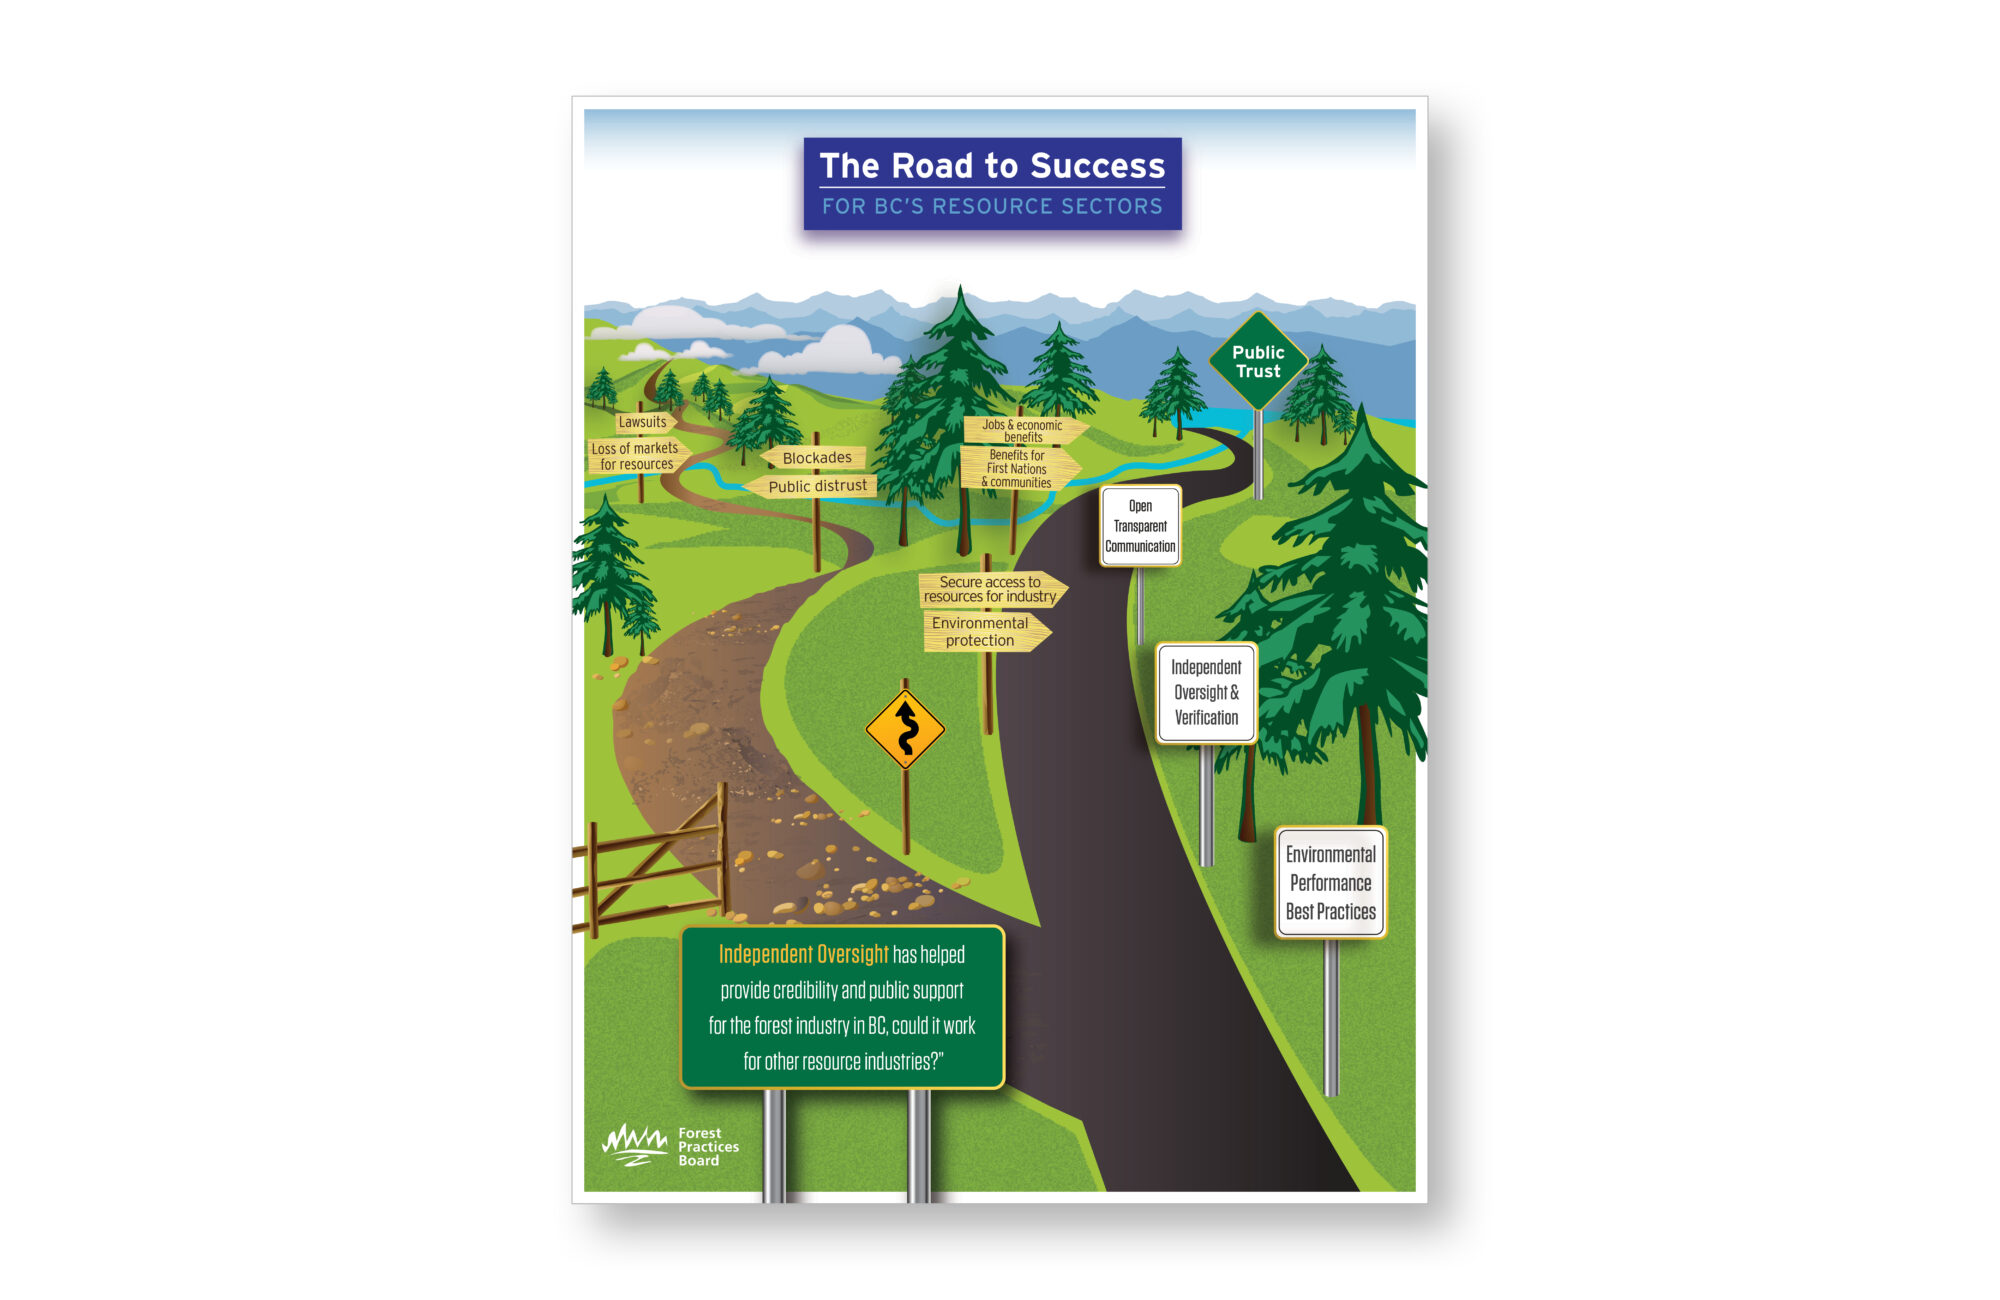 Forest Practices Board - The Road to Success Infographic